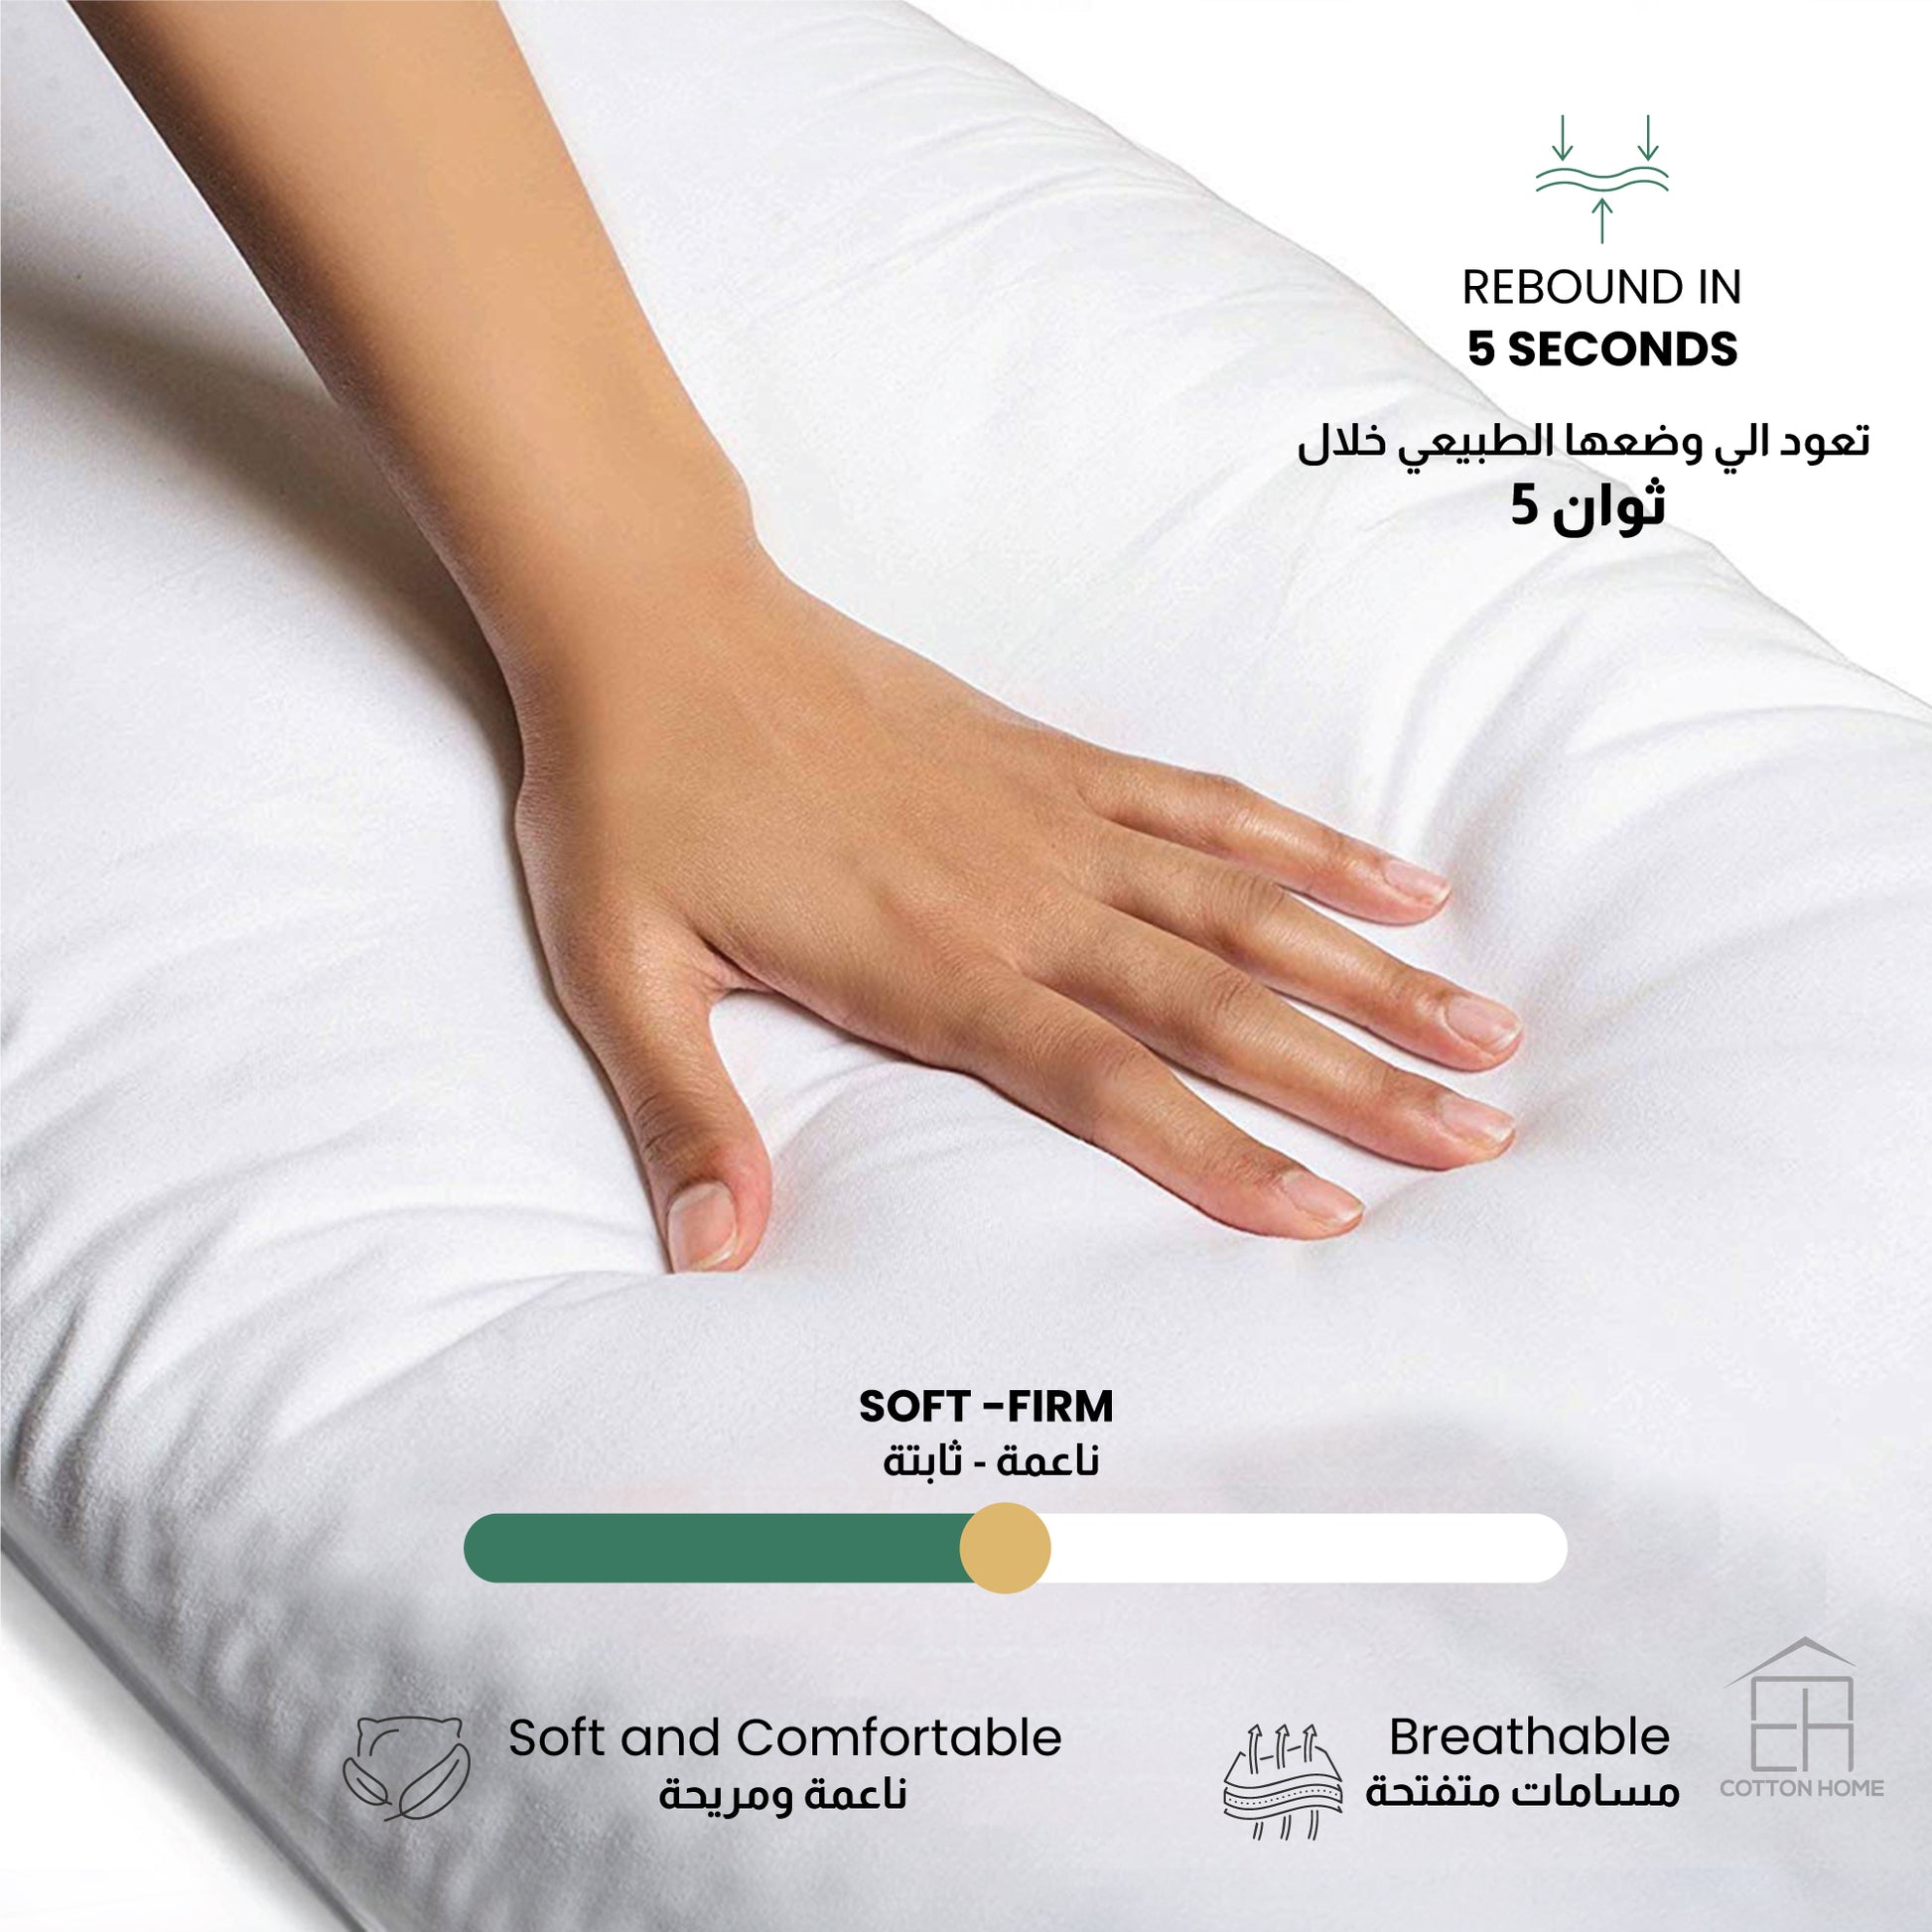 Elite Medium Size Soft Pack of 2 Pillow with Gray Cord for Ultimate Support Ergonomically designed suitable for Back Sleeper and Side Sleeper 50x70CM 900grams